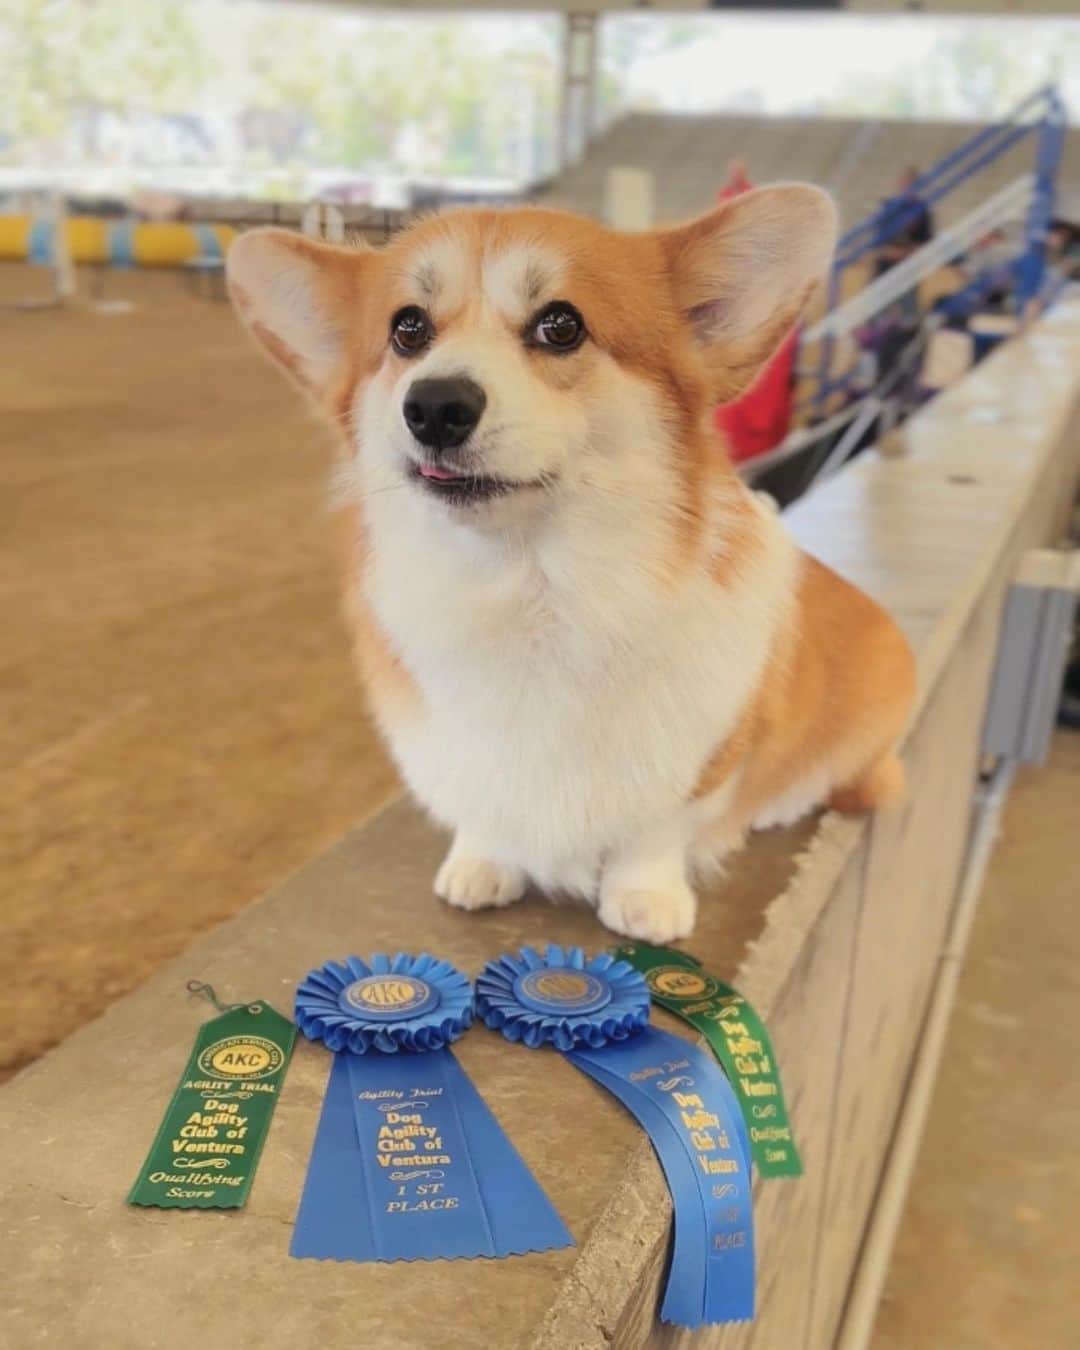 Geordi La Corgiのインスタグラム：「So proud of this cutie patootie! We went to our second agility trial, and Scotty picked up his first jumpers Q and second FAST Q, taking first place in both classes. 😱  He didn’t show any signs of any ring stress (such as getting zoomies, disengaging and sniffing) and ran happy and focused. And of course, I tried to take a nice ribbon photo but he had to throw in his signature blep.   If you’ve never tried it, I highly recommend trying out agility! Such a great way to build a better relationship with your dog and it’s so much fun. (I also HATE regular exercises, so running agility at least forces me to do some cardio 🤣)」